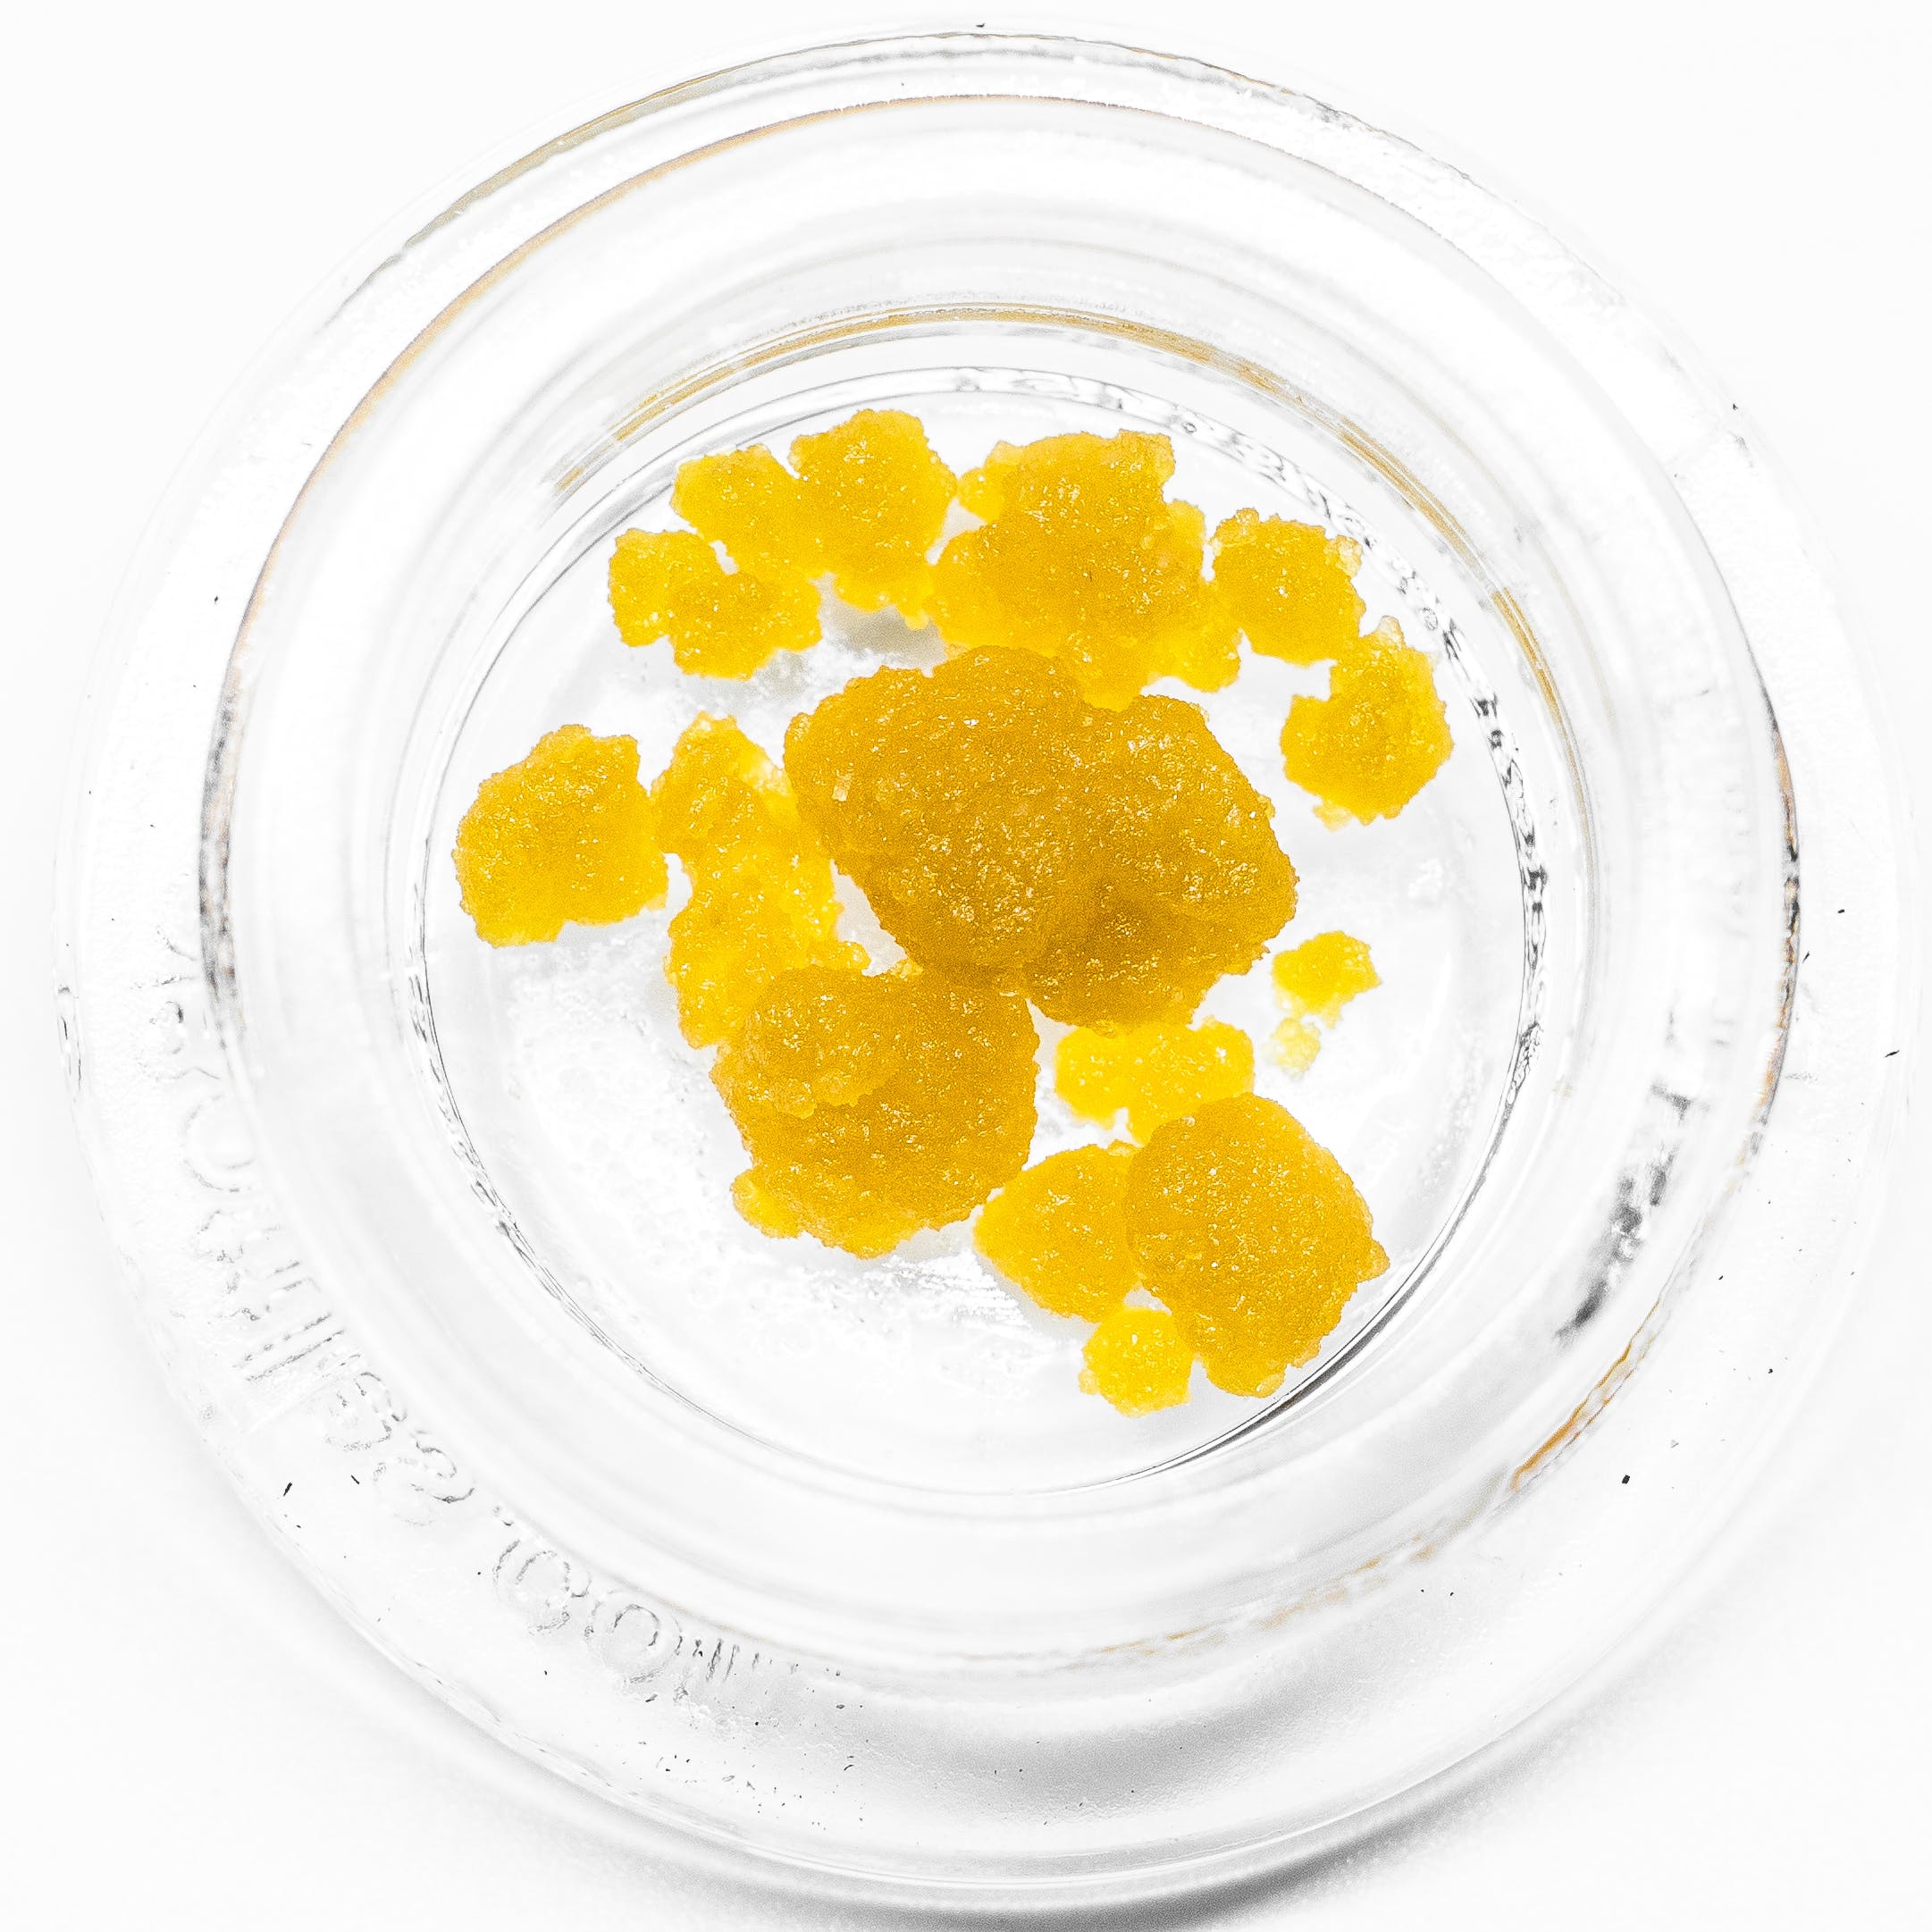 $45 SUMMIT Blueberry Live Resin (I) 75.69% *BUY ONE, GET ONE 50% OFF*